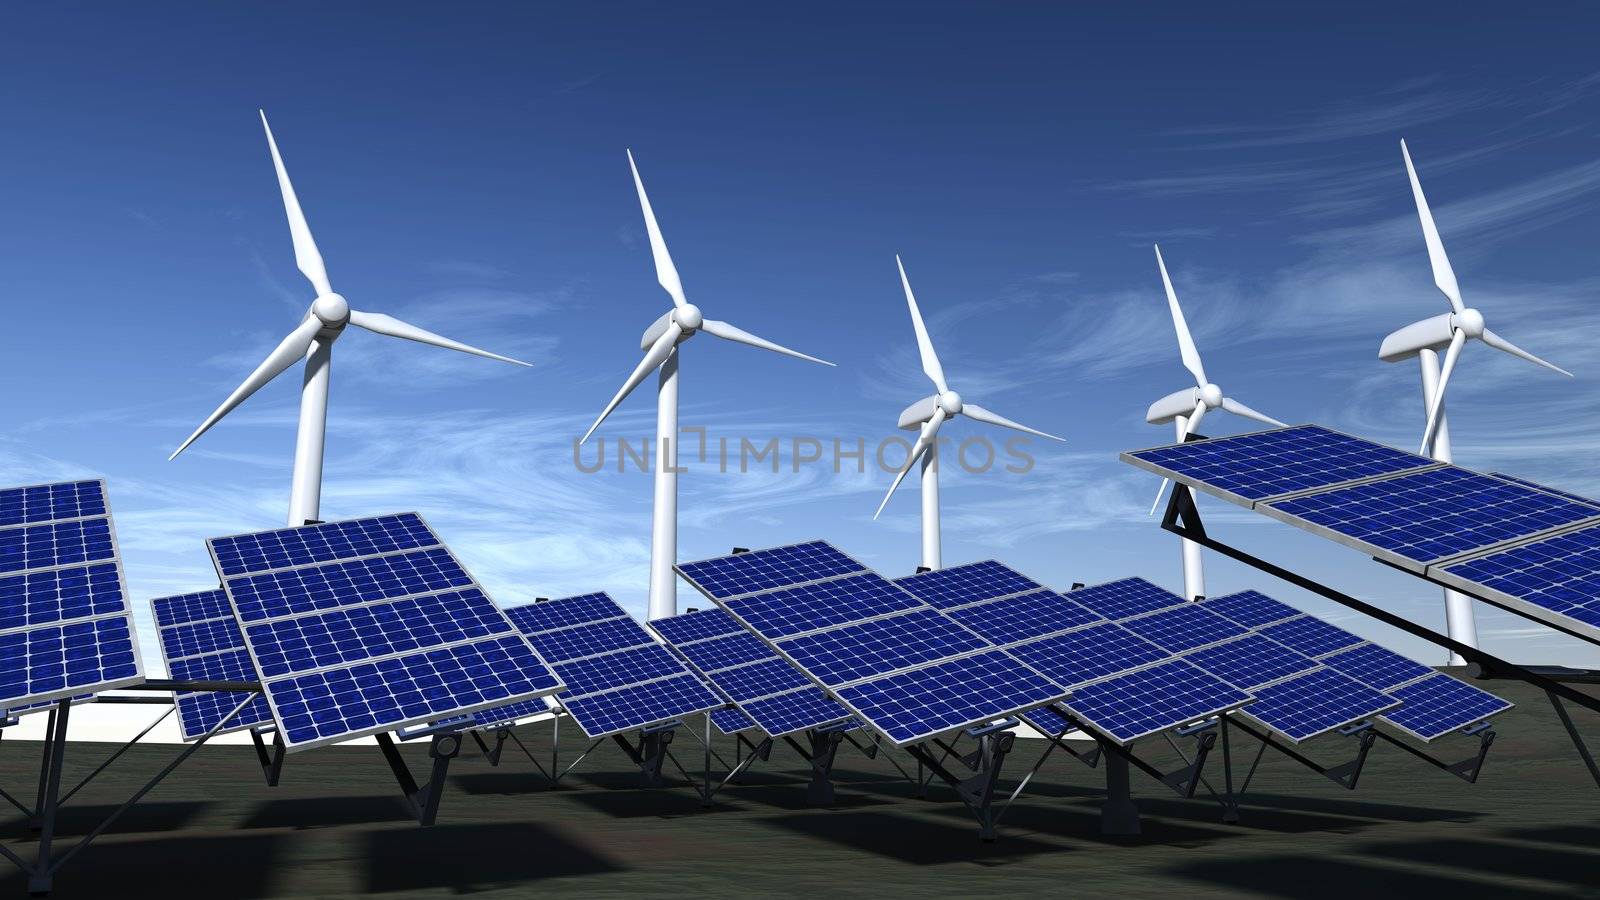 Wind turbines and articulated solar panels with a blue sky